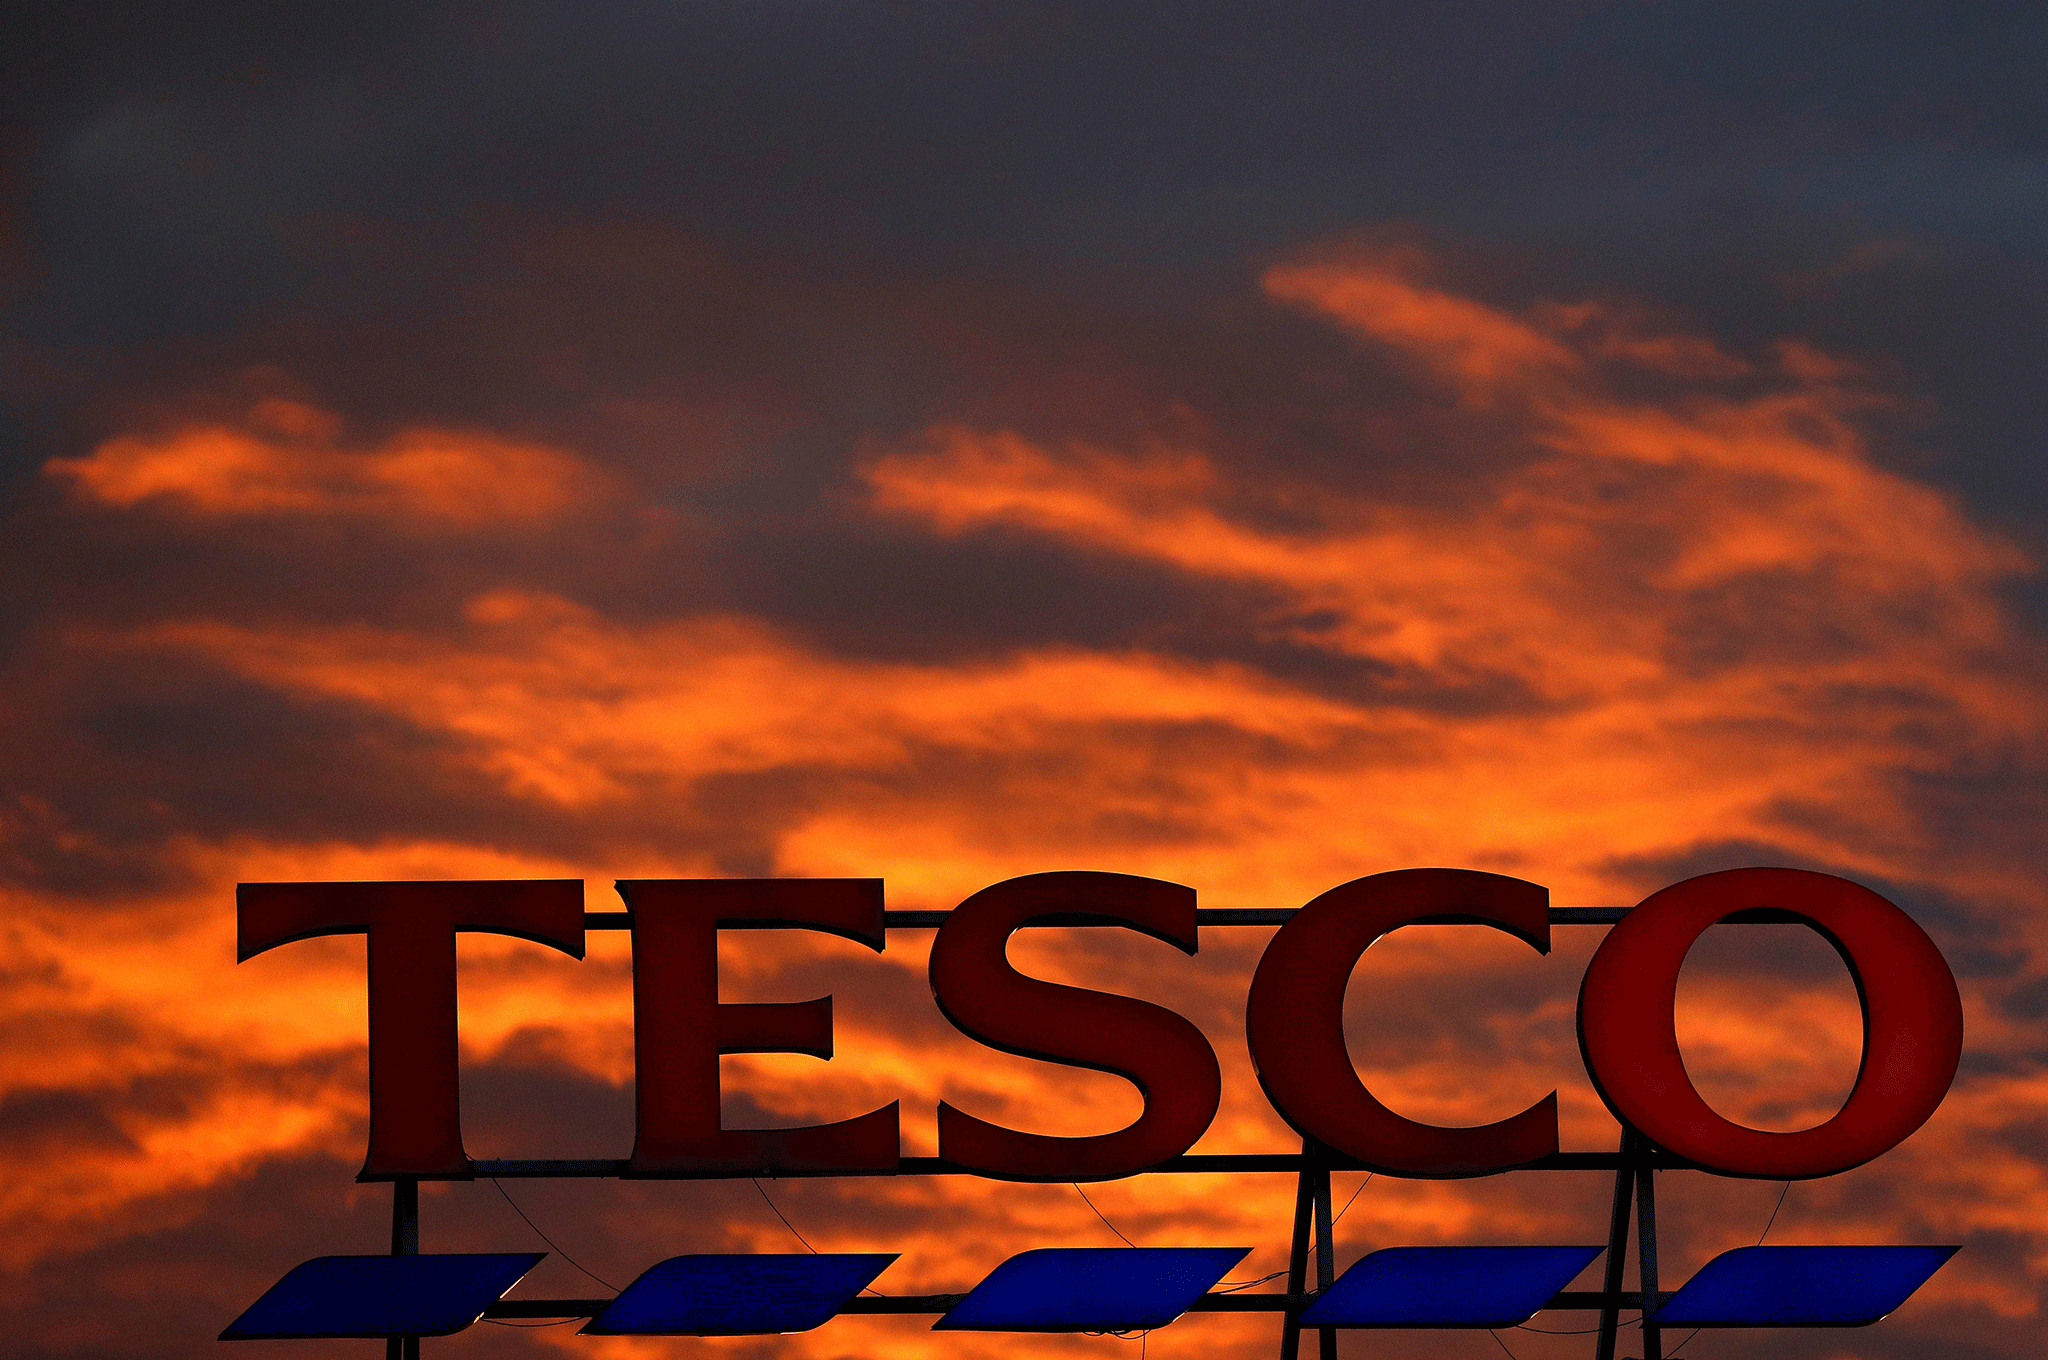 Tesco executives to face trial in 2017 after accounting scandal